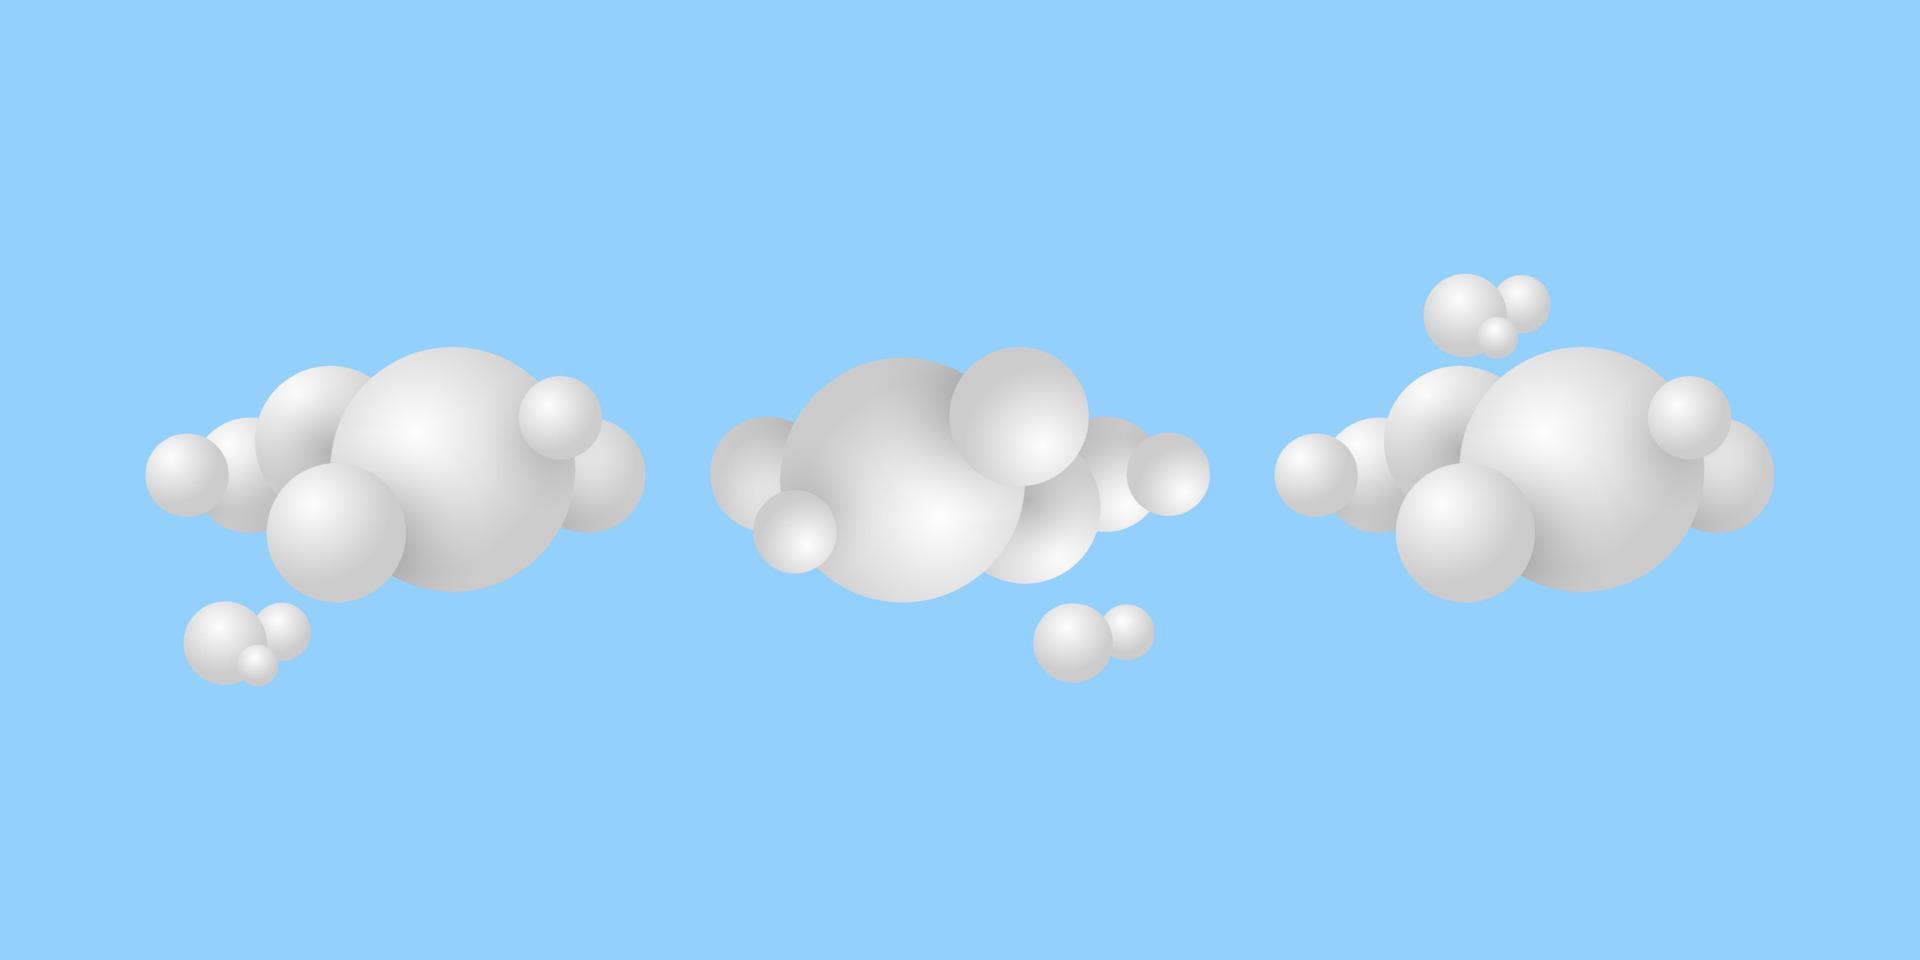 White 3D clouds cartoon isolated on a blue background vector